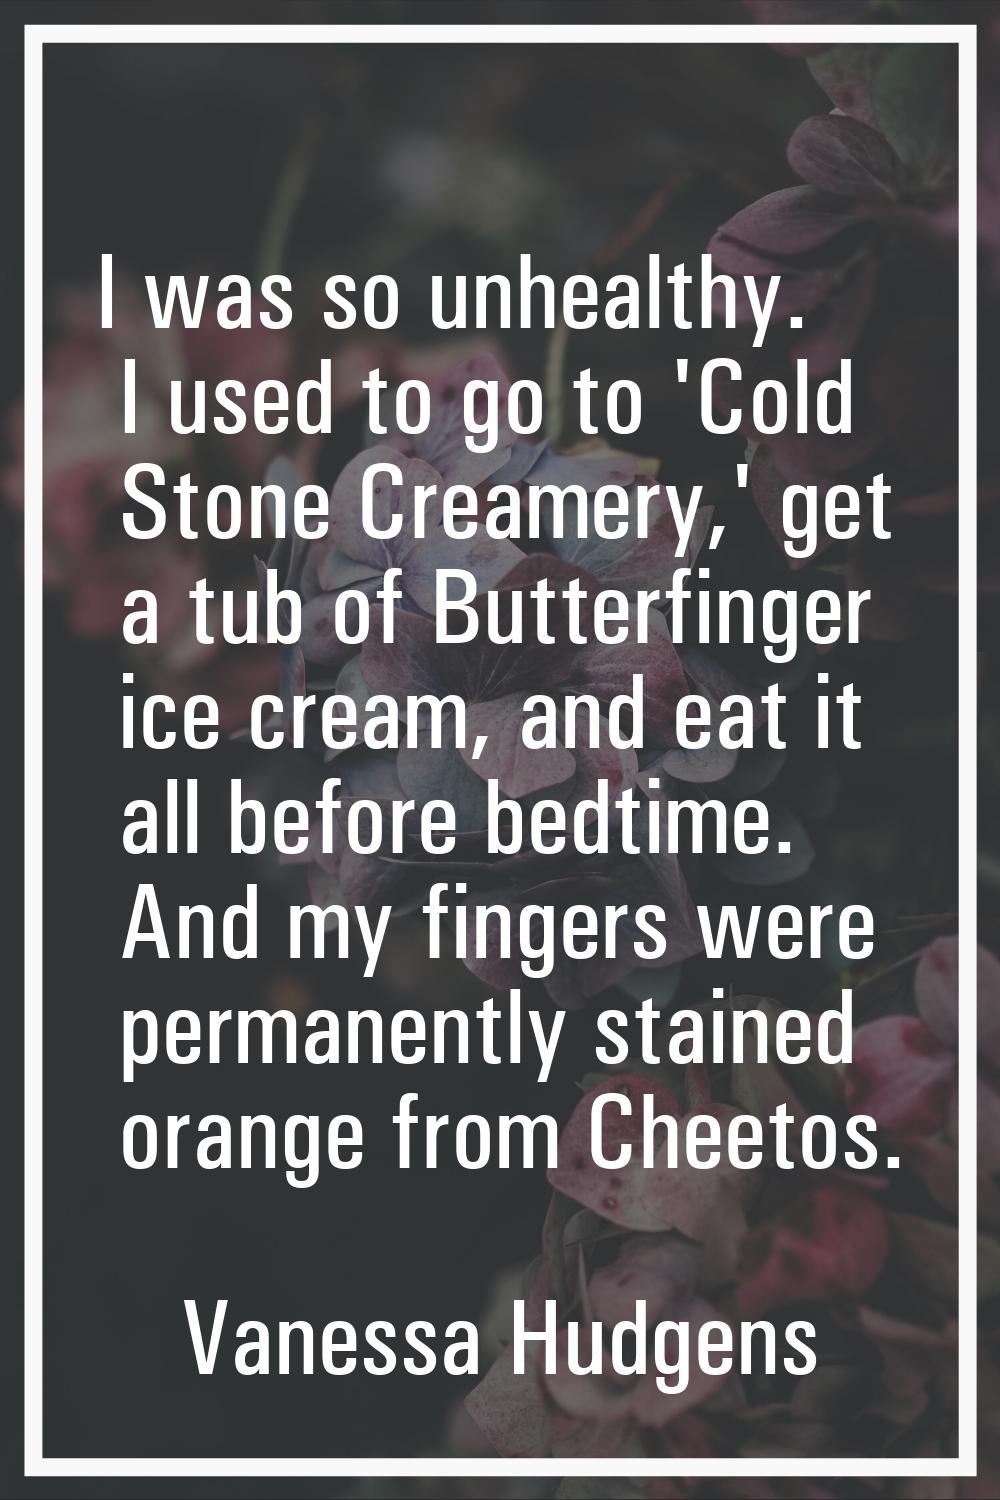 I was so unhealthy. I used to go to 'Cold Stone Creamery,' get a tub of Butterfinger ice cream, and